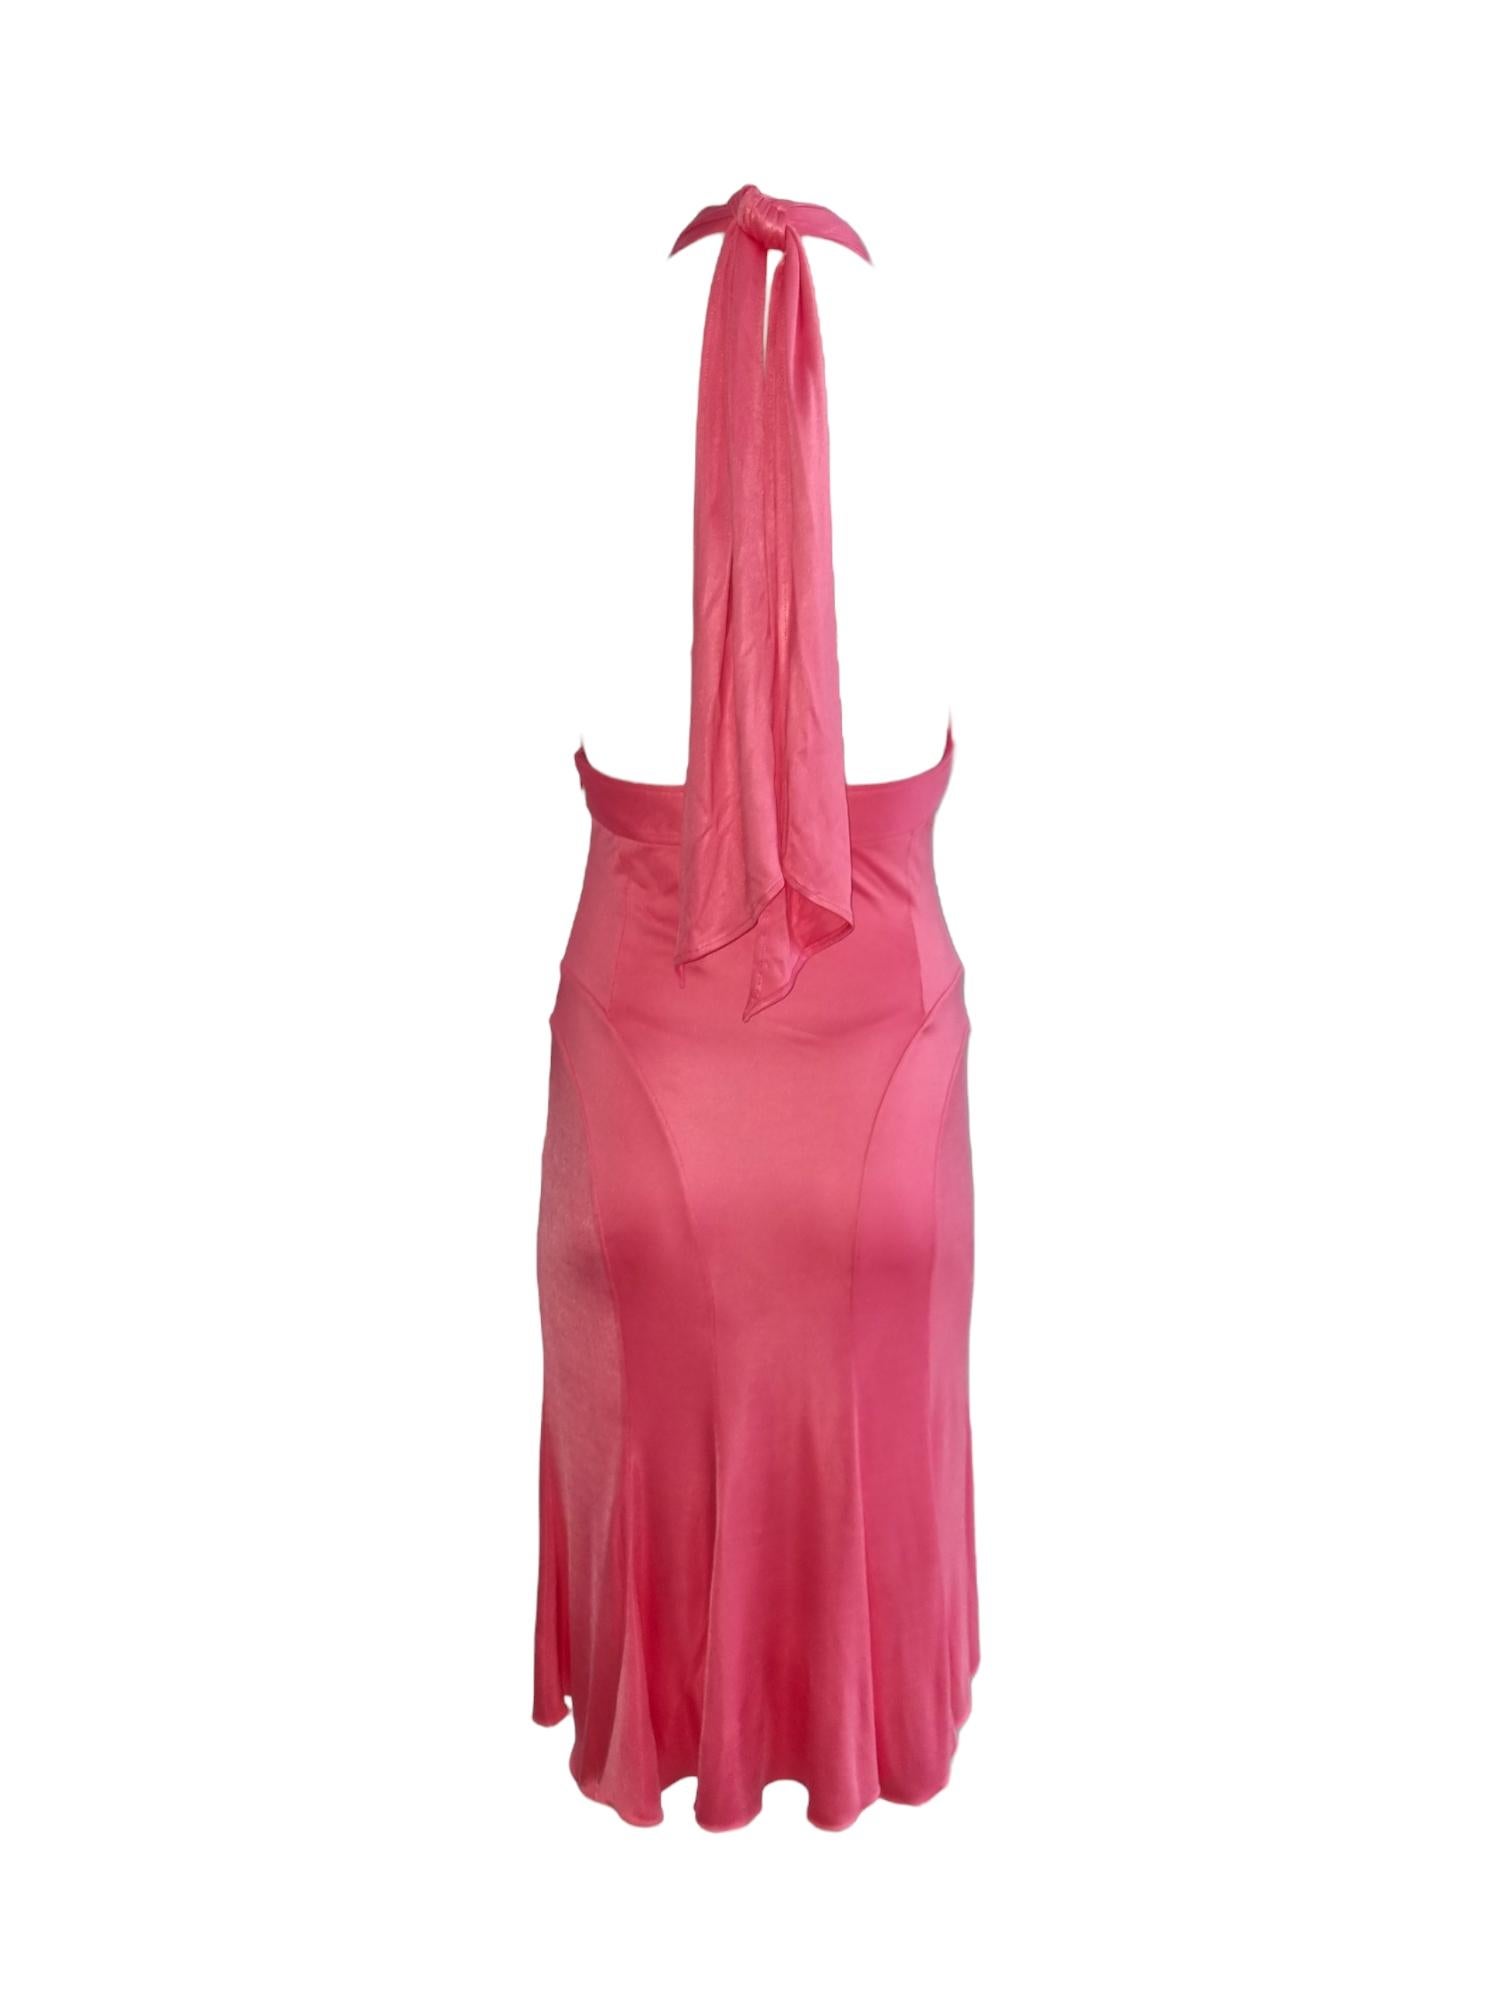 Versace pink medusa logo runway dress, SS 2005 In Excellent Condition For Sale In London, GB